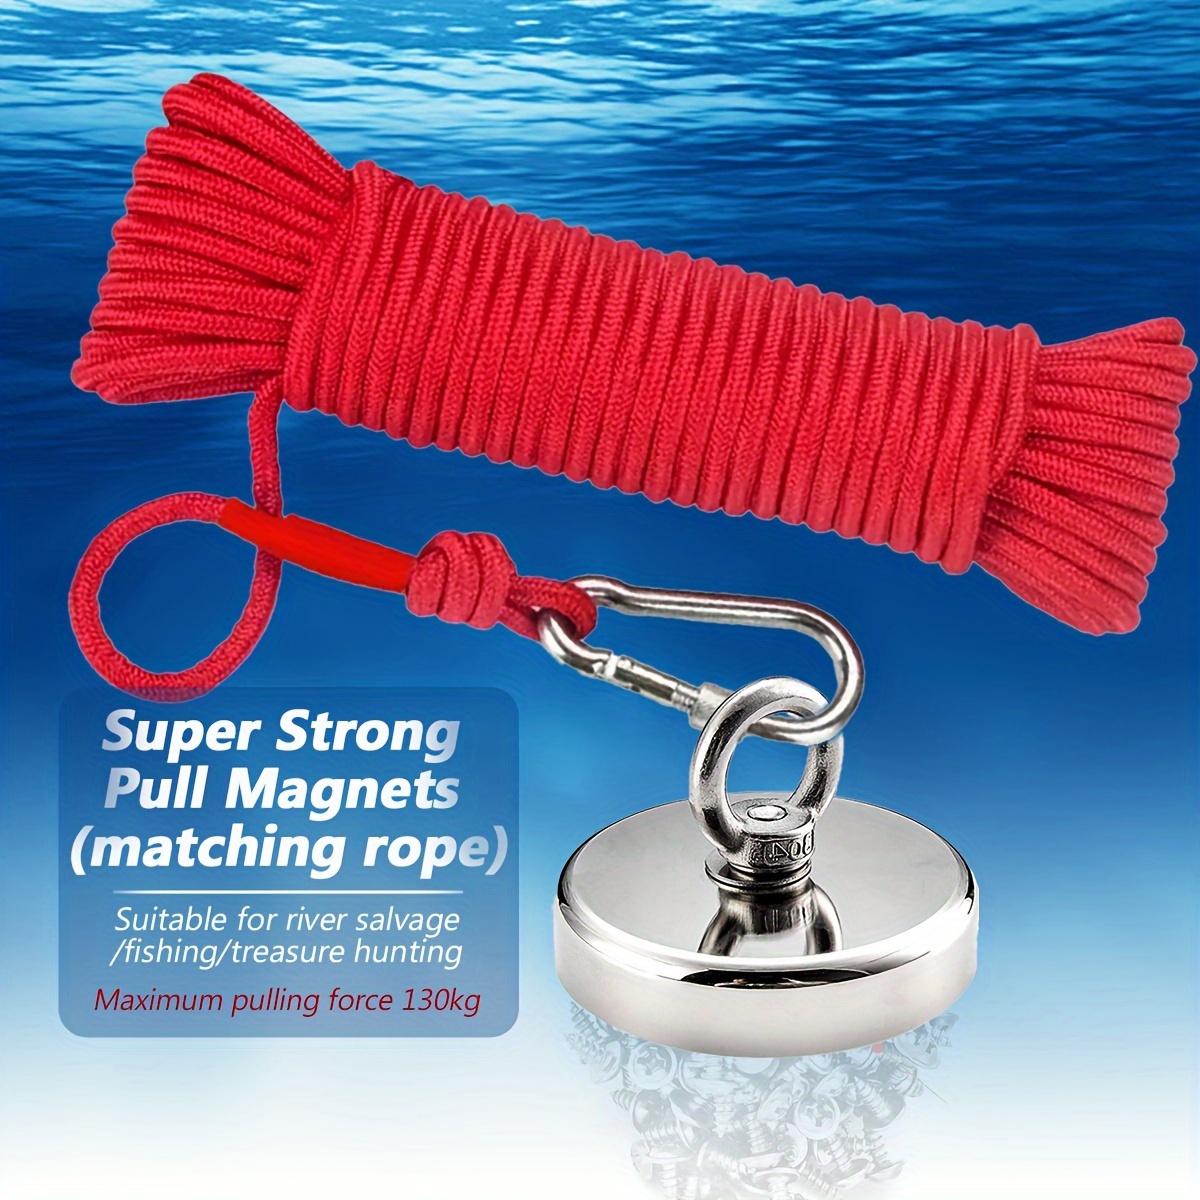 

350lb Pull Neodymium Fishing Magnet - Super Strong Rare Earth Disc Magnet With 65ft Red Rope - Ideal For Magnetic River Salvage, Treasure Hunting, And Holiday Gifts (thanksgiving, Father's Day)